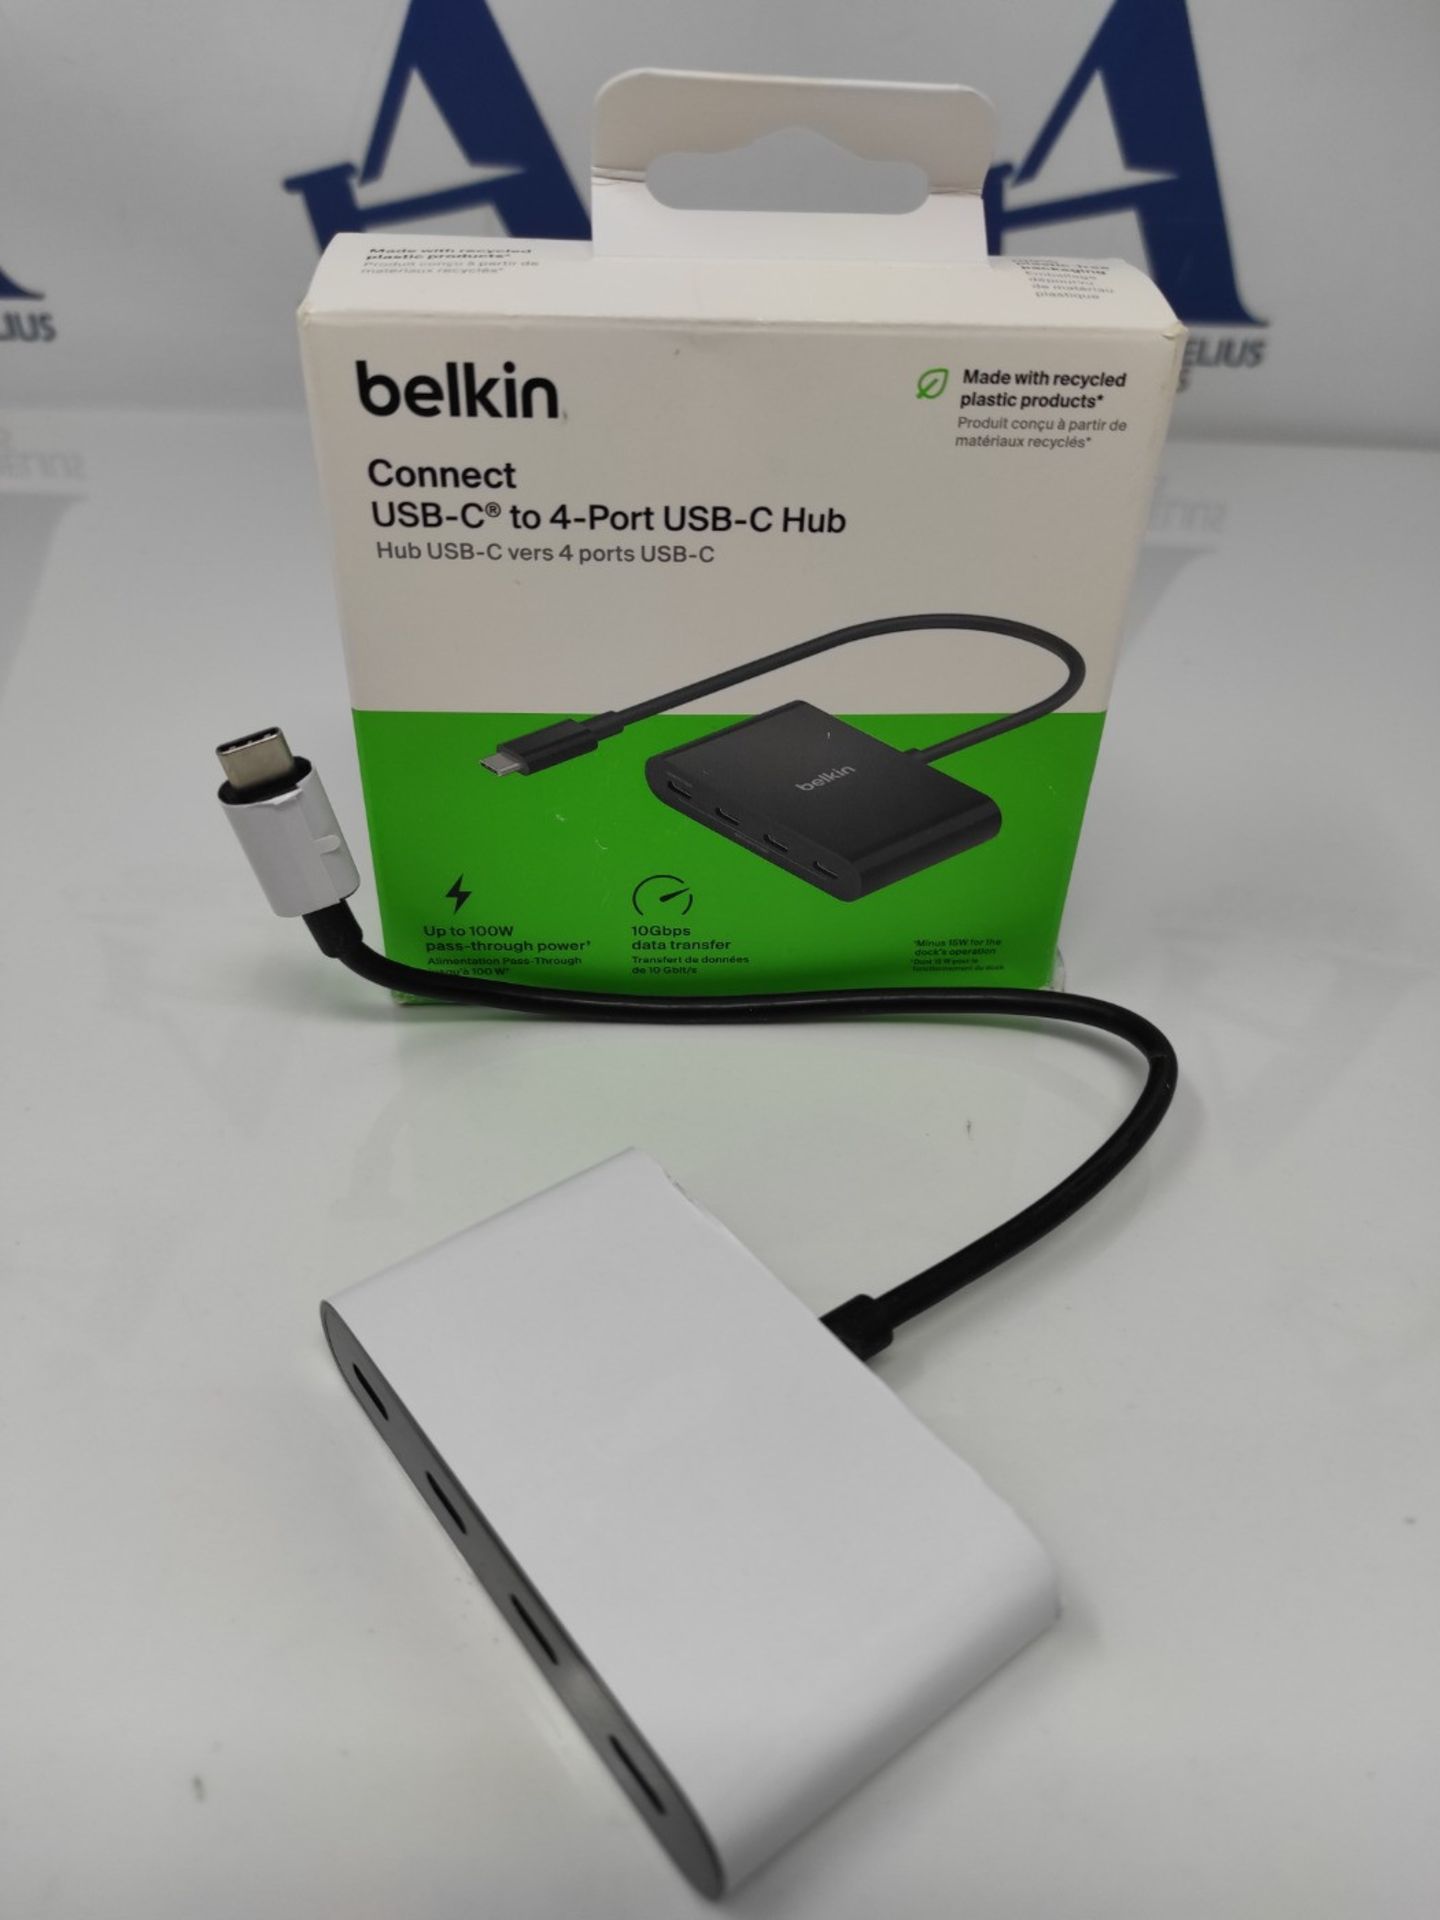 Belkin CONNECT USB-C"! to 4-Port USB-C Hub, Multiport Adapter Dongle with 4 USB-C 3.2 - Image 2 of 2